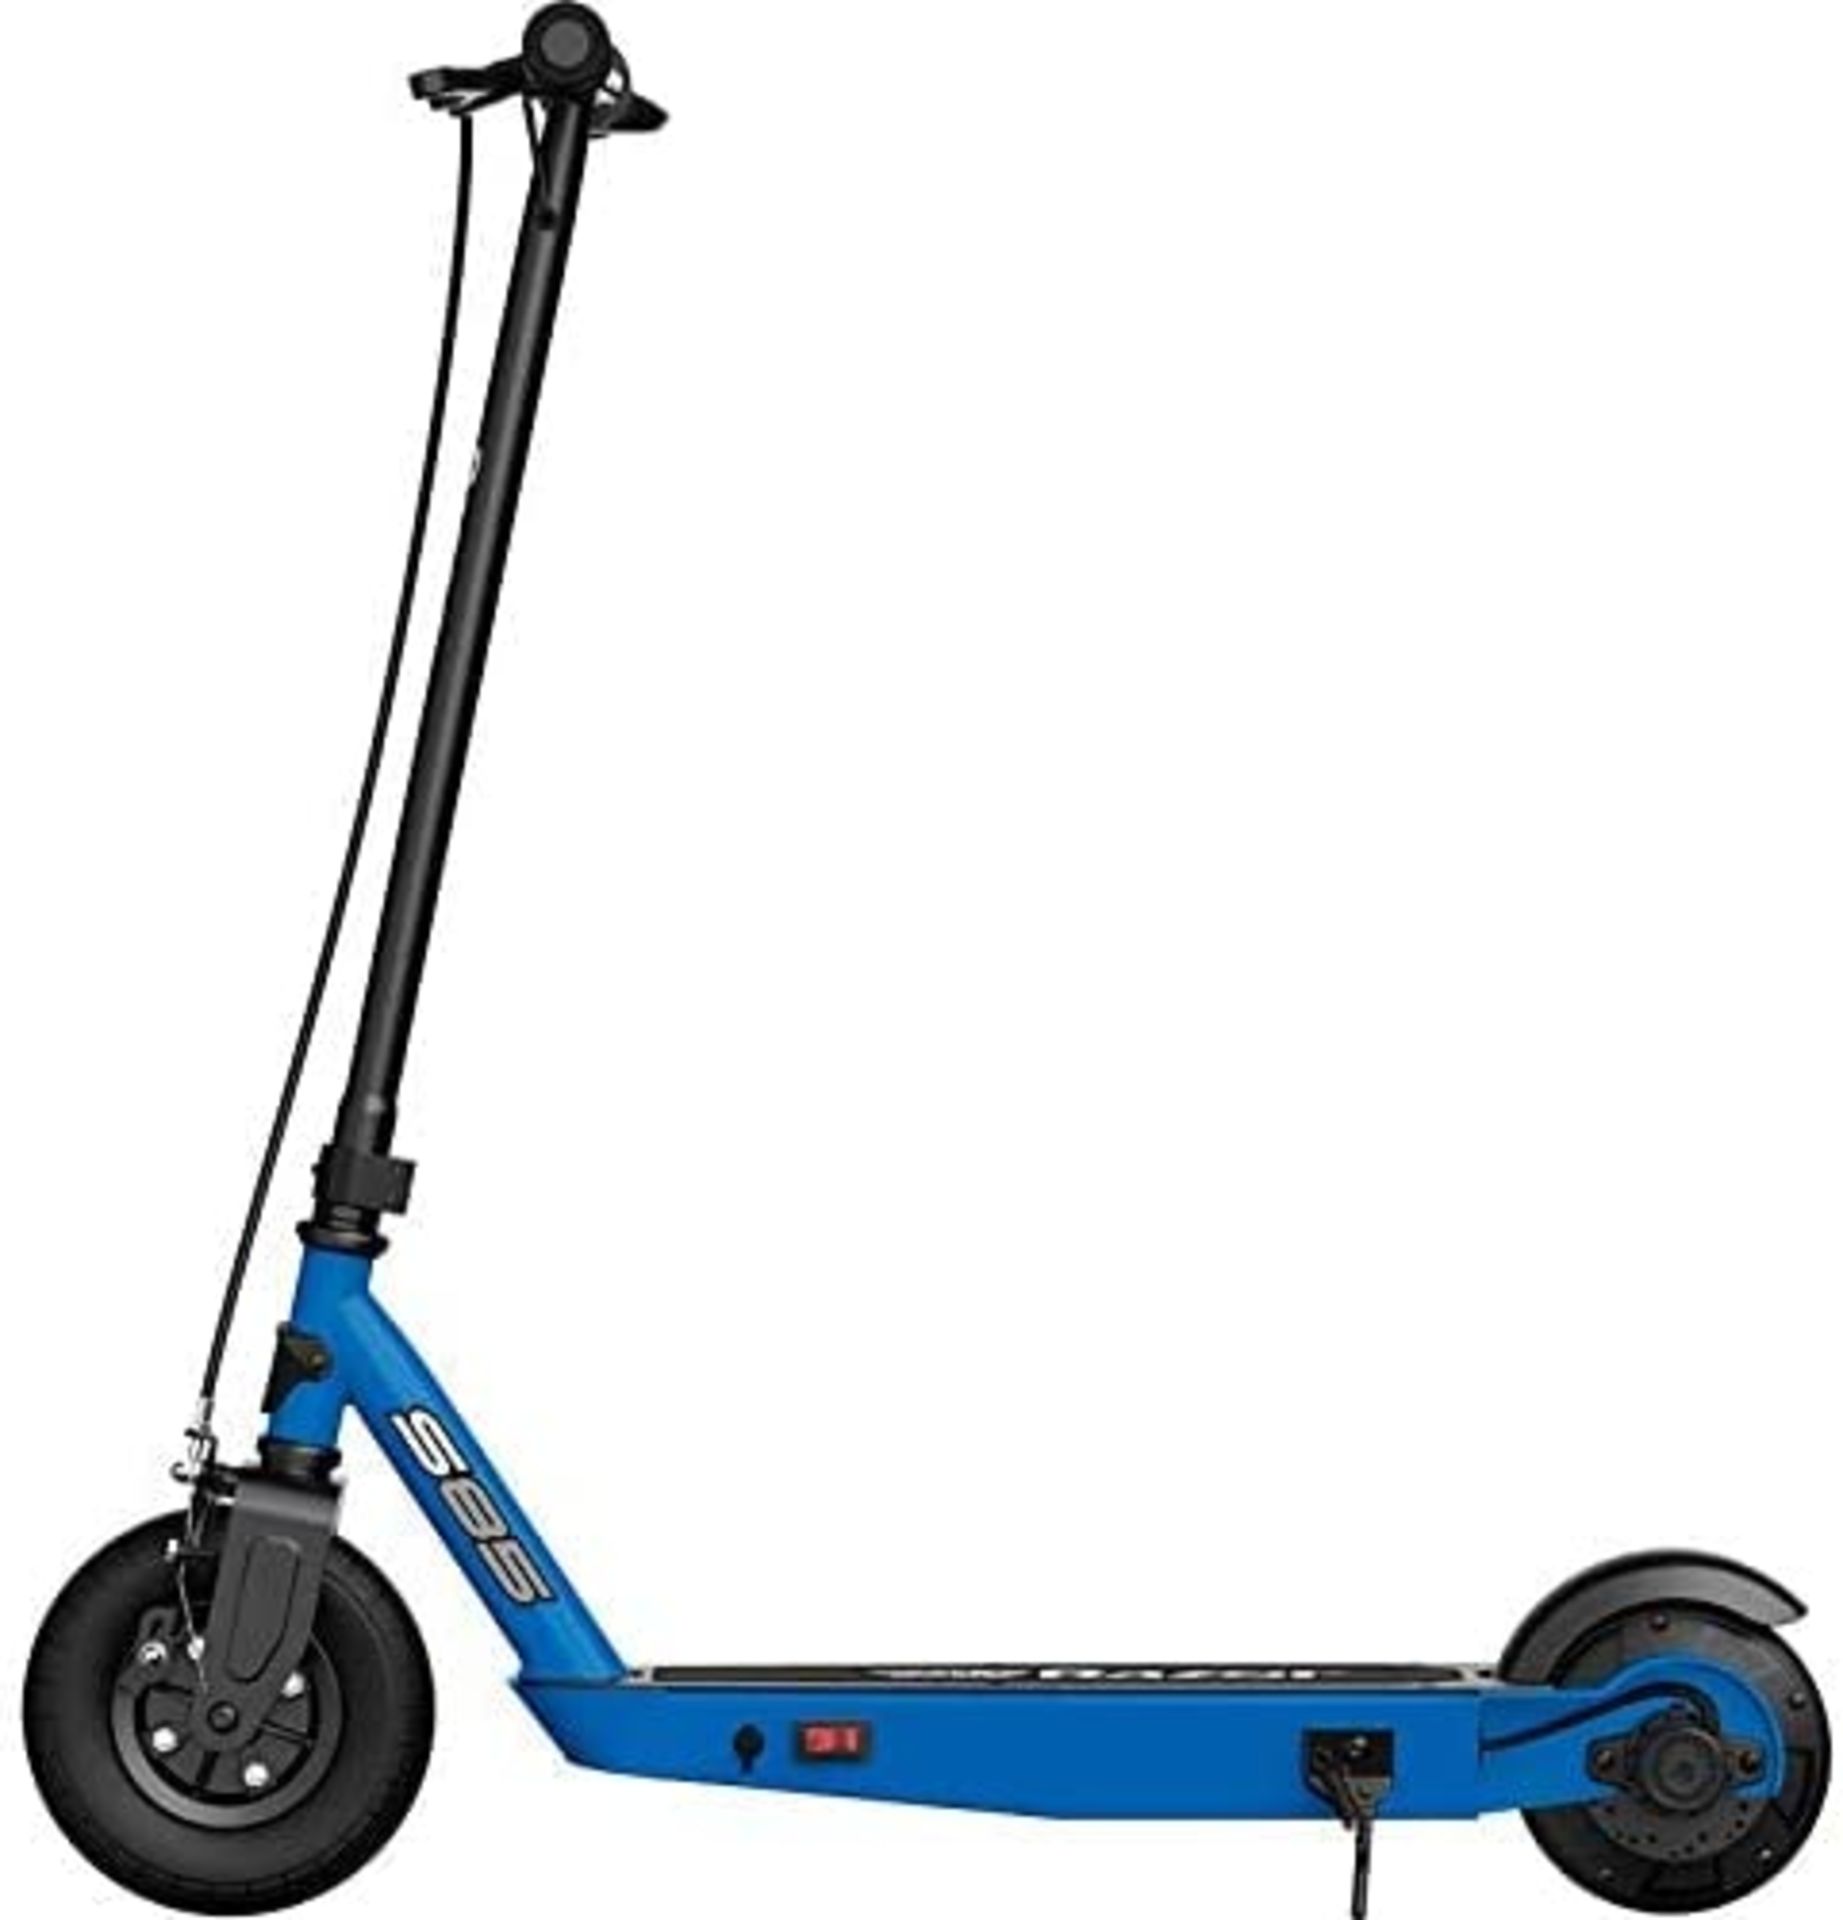 Razor Power Core S85 Electric Scooter. RRP £250.00. Powered by PowerCore –Innovative Power Core